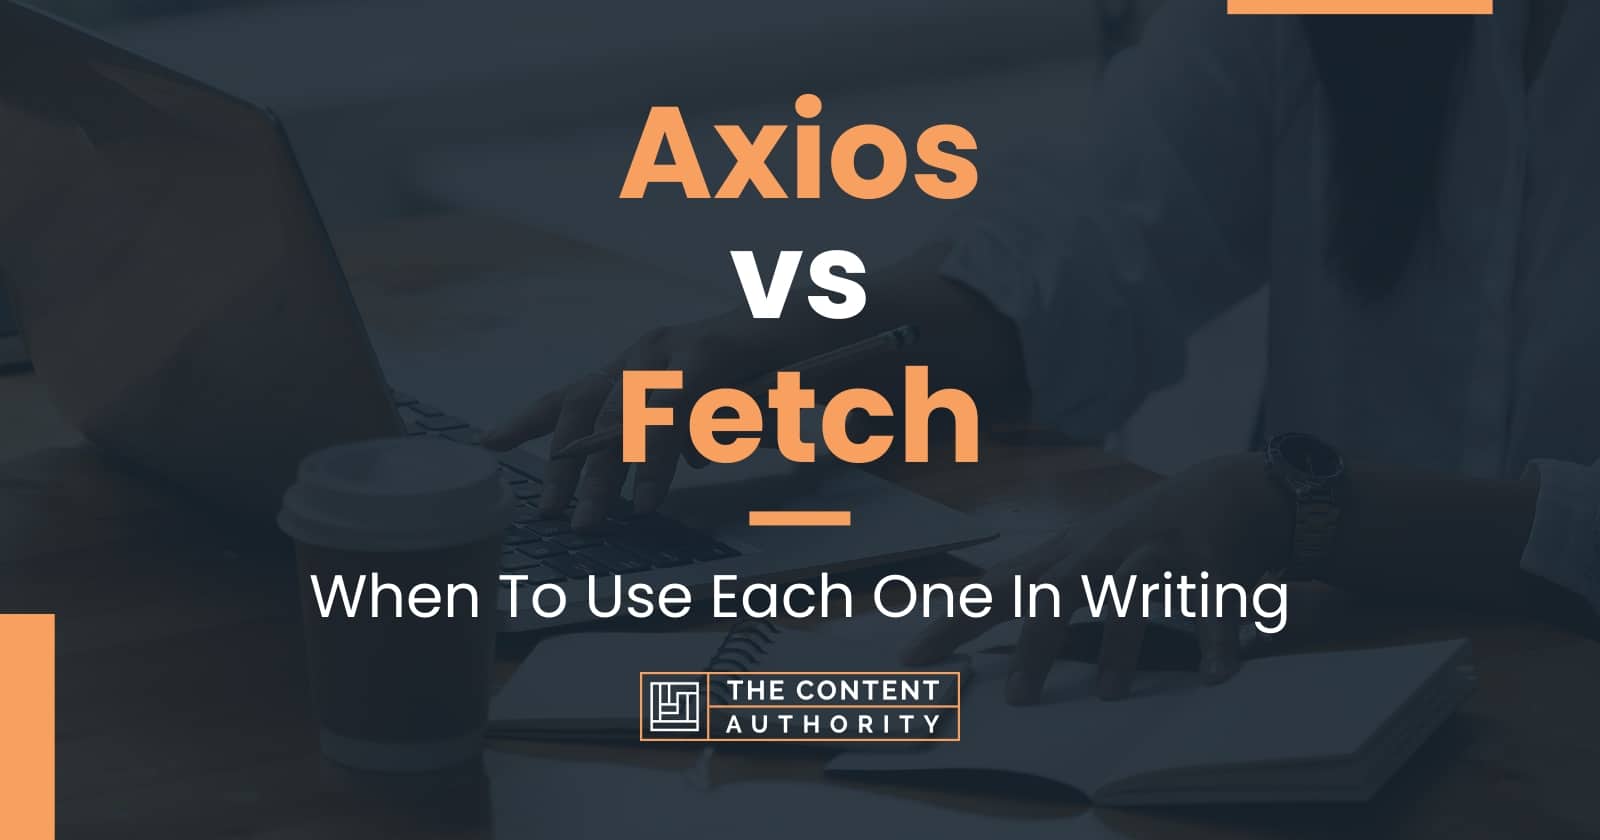 Axios vs Fetch When To Use Each One In Writing